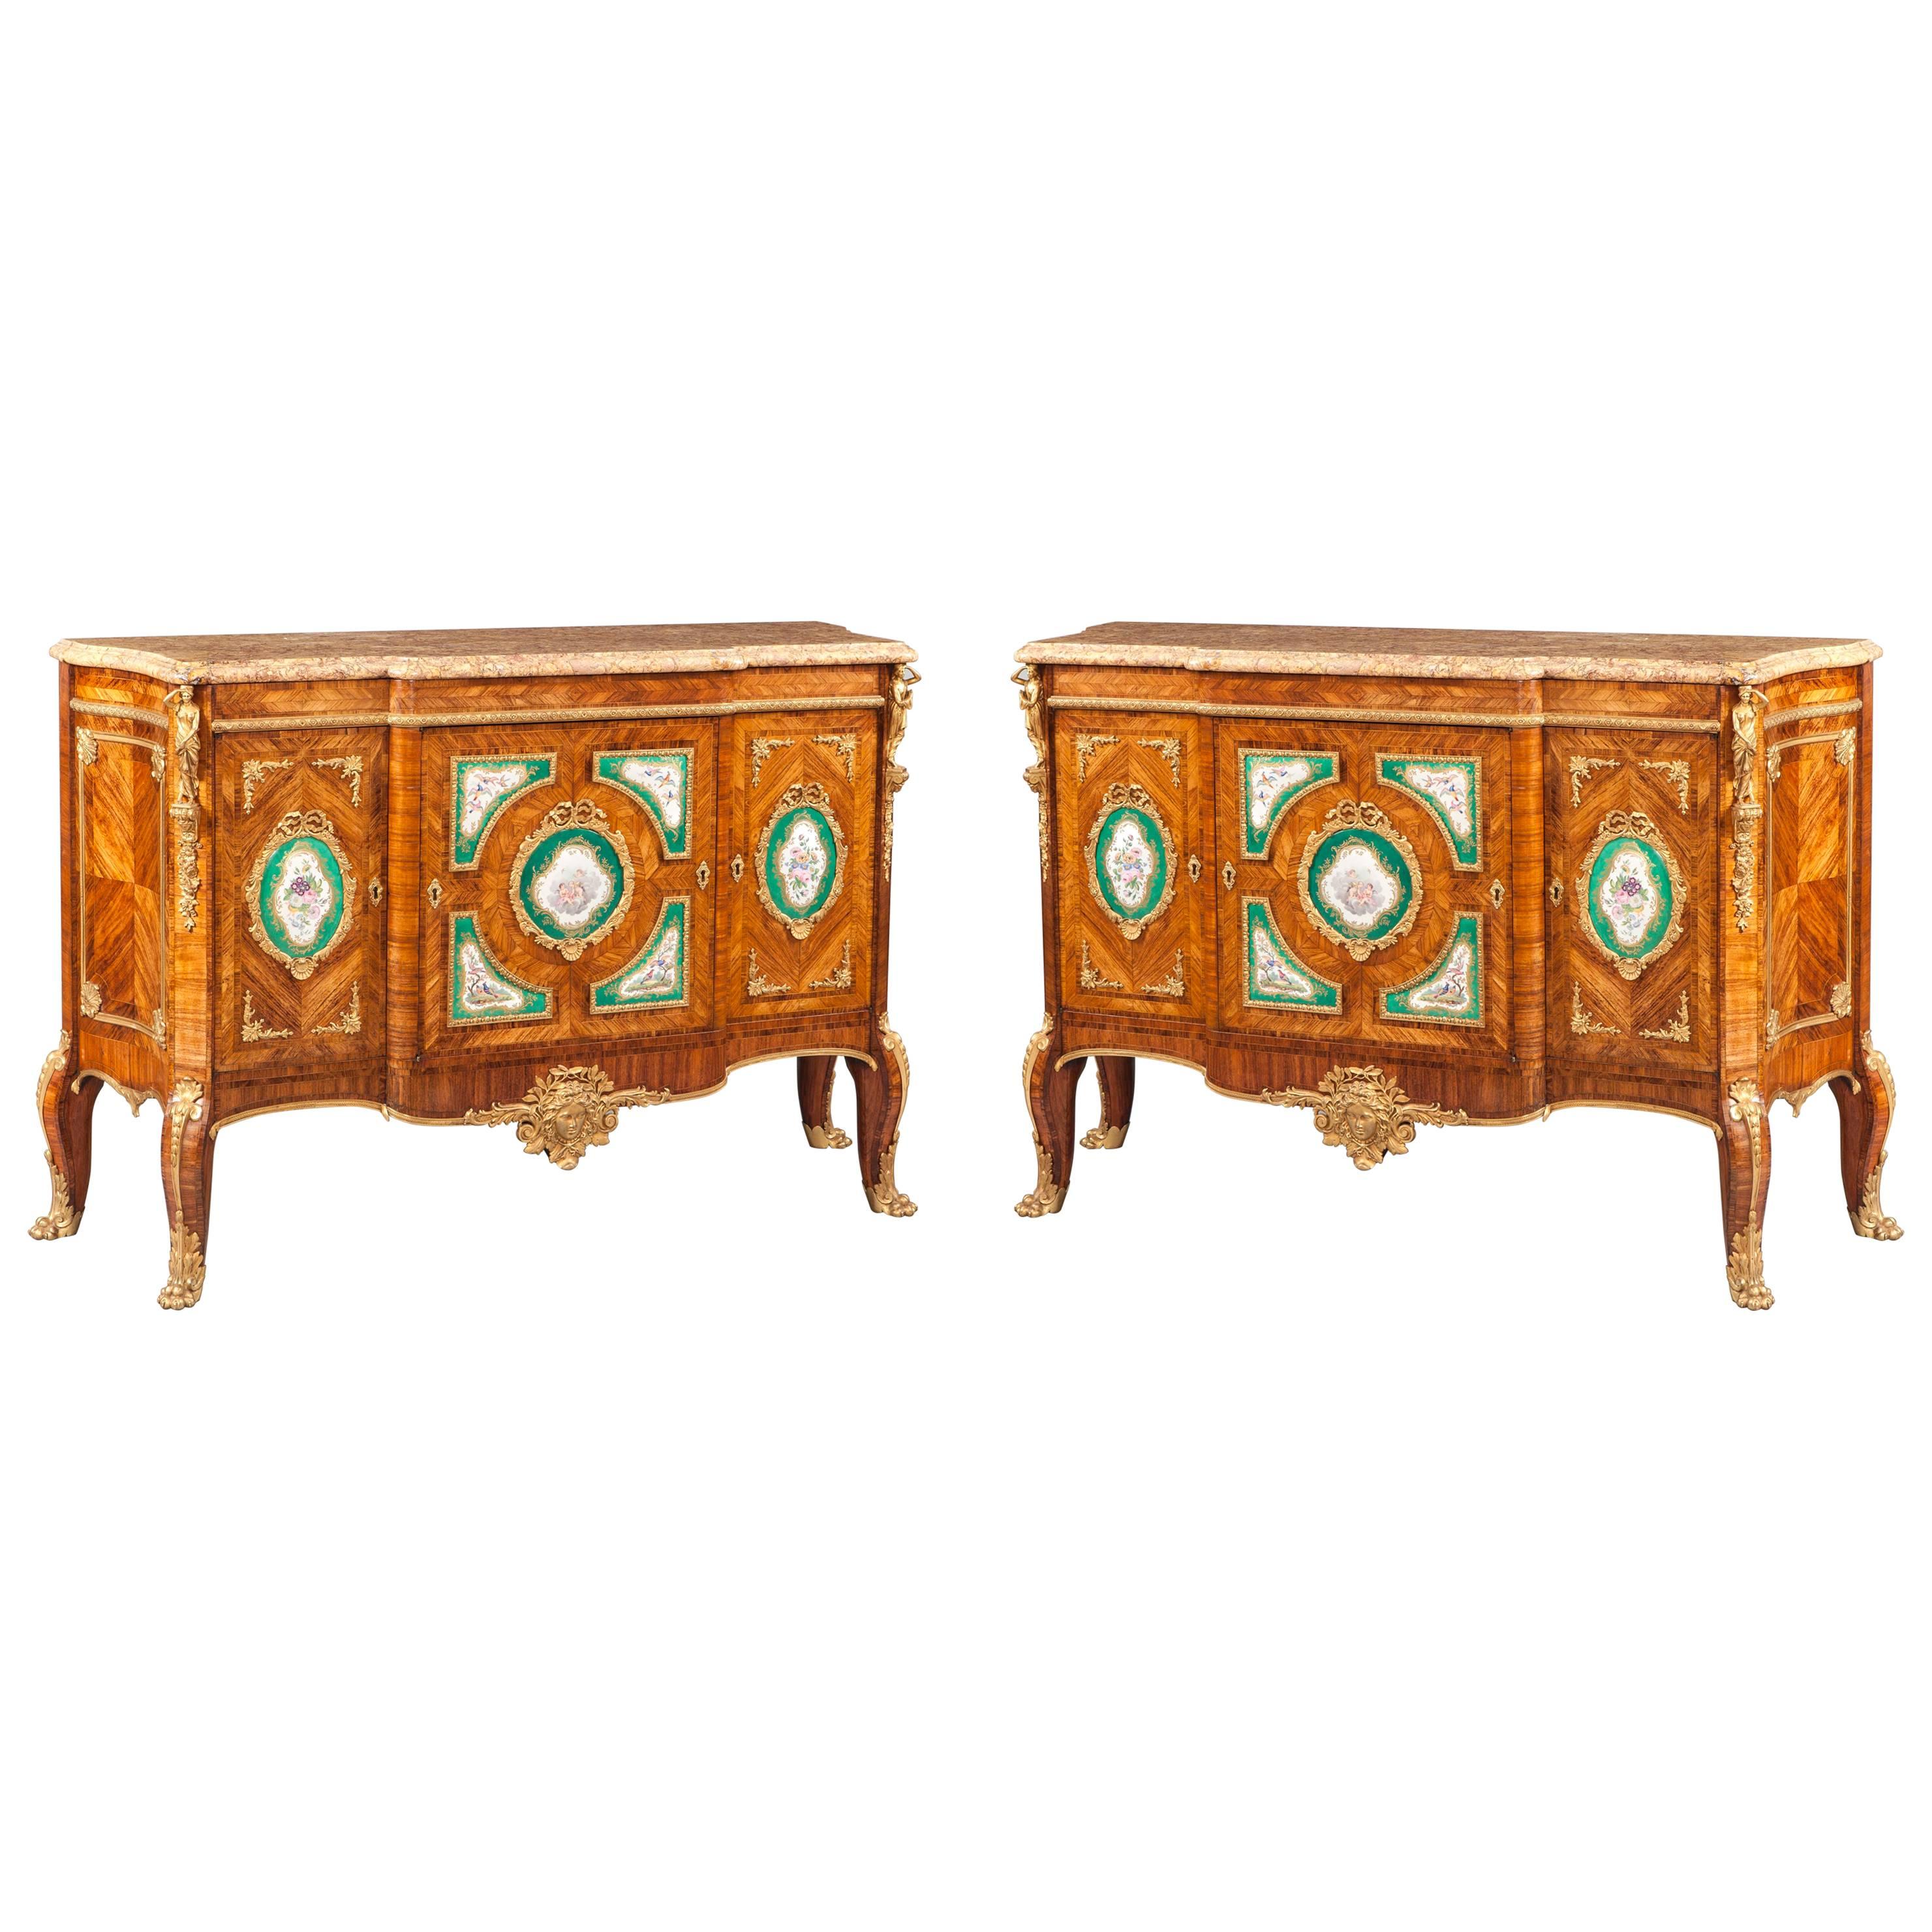 Pair of 19th Century Commodes of Kingwood, Green Porcelain Plaques and Marble